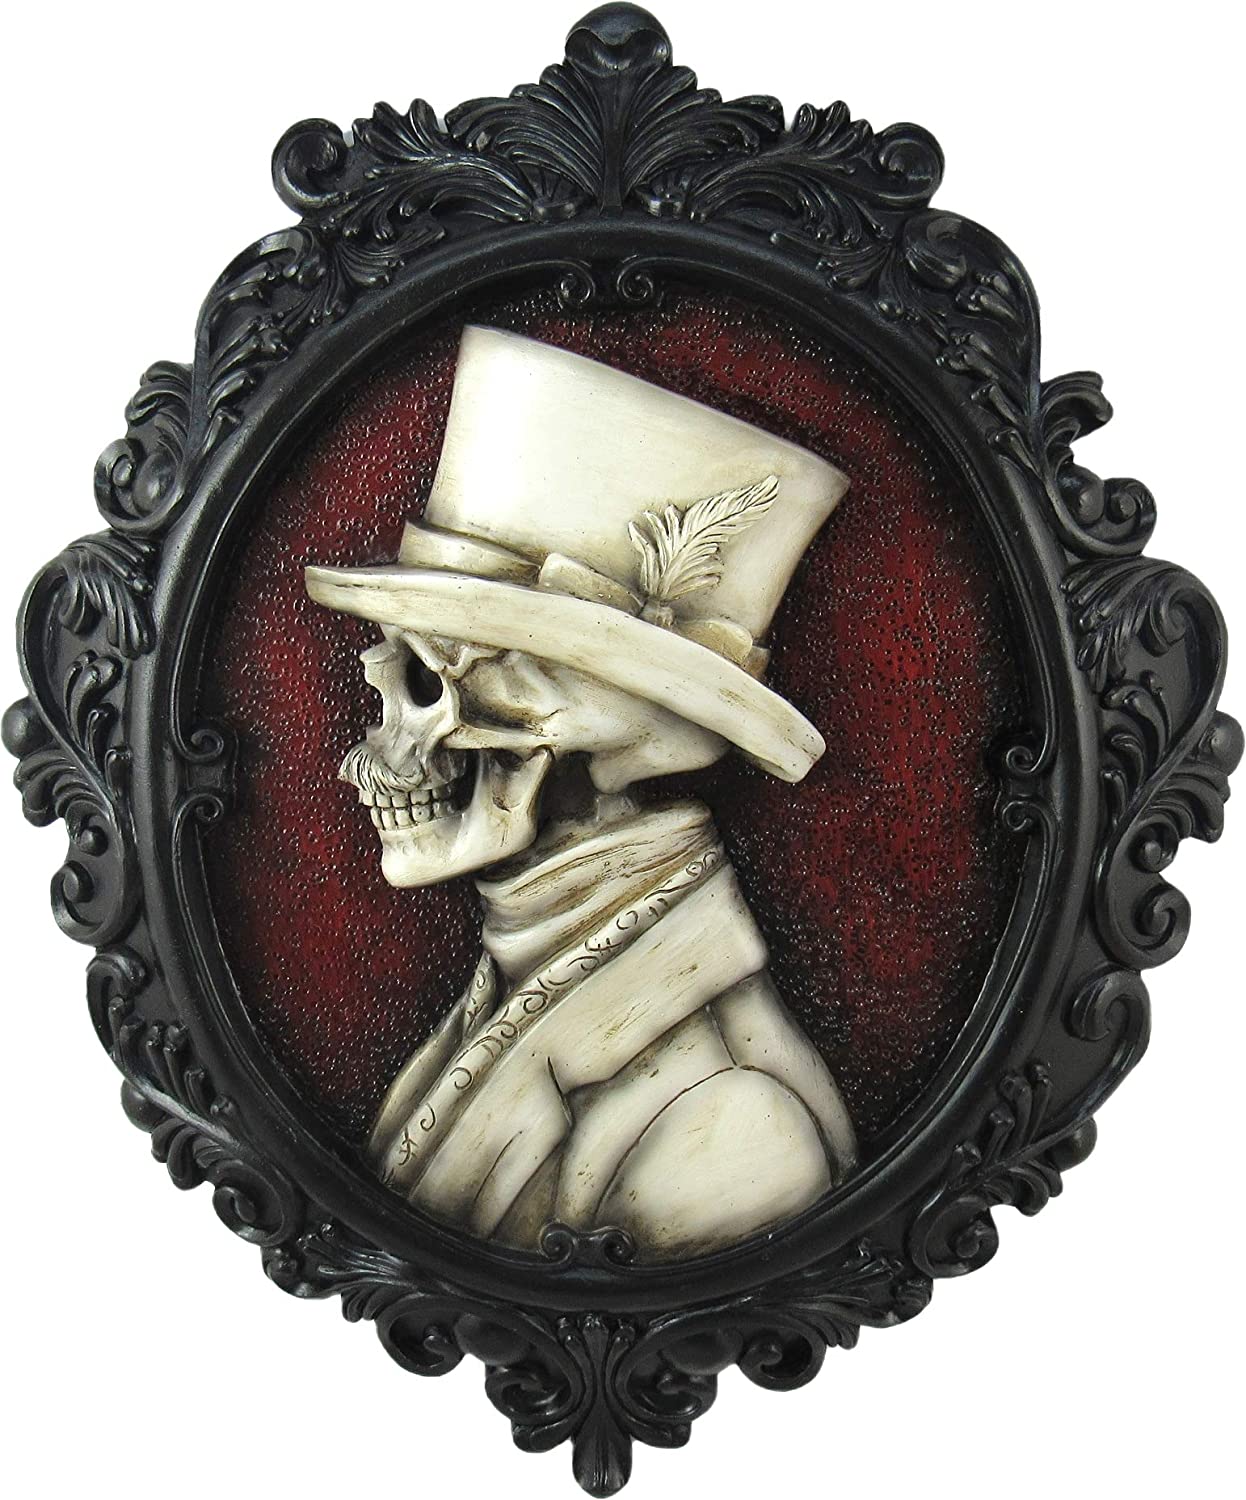 Victorian Gothic Collection Madam and Count (2PK) Cameo Gothic Wall Sculptures - Scary Halloween Decor